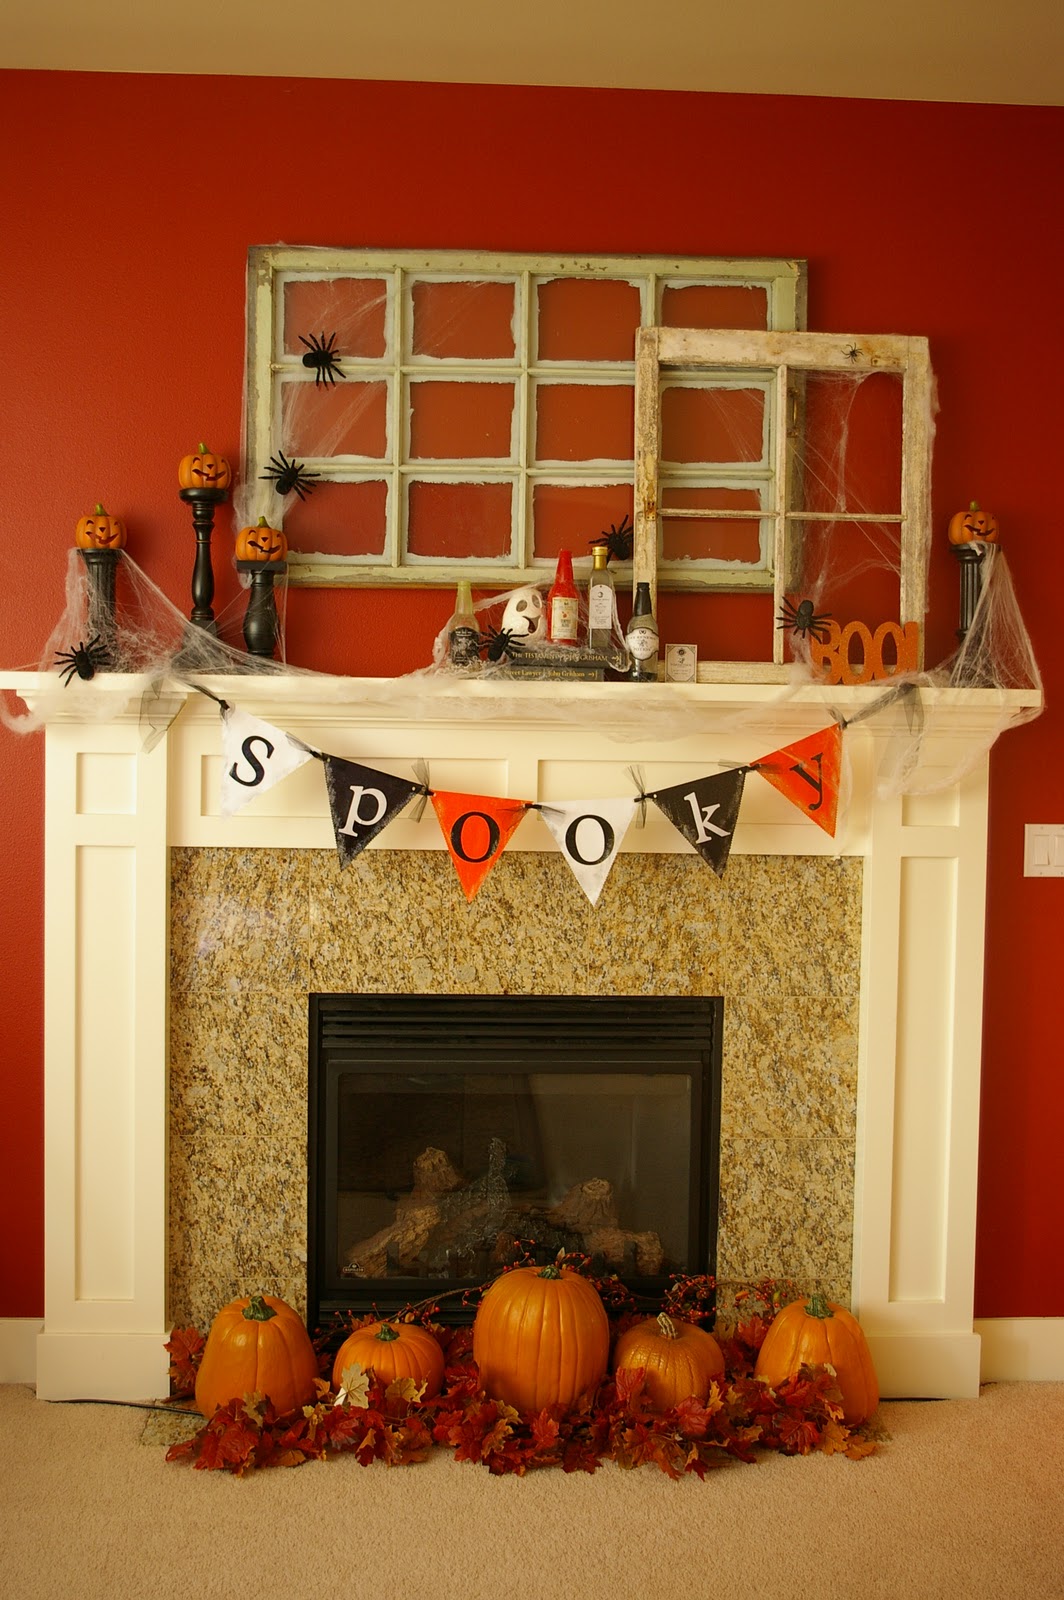 Two antique window frames gets a holiday makeover thanks to a creepy spider webs and spider silhouette cutouts.